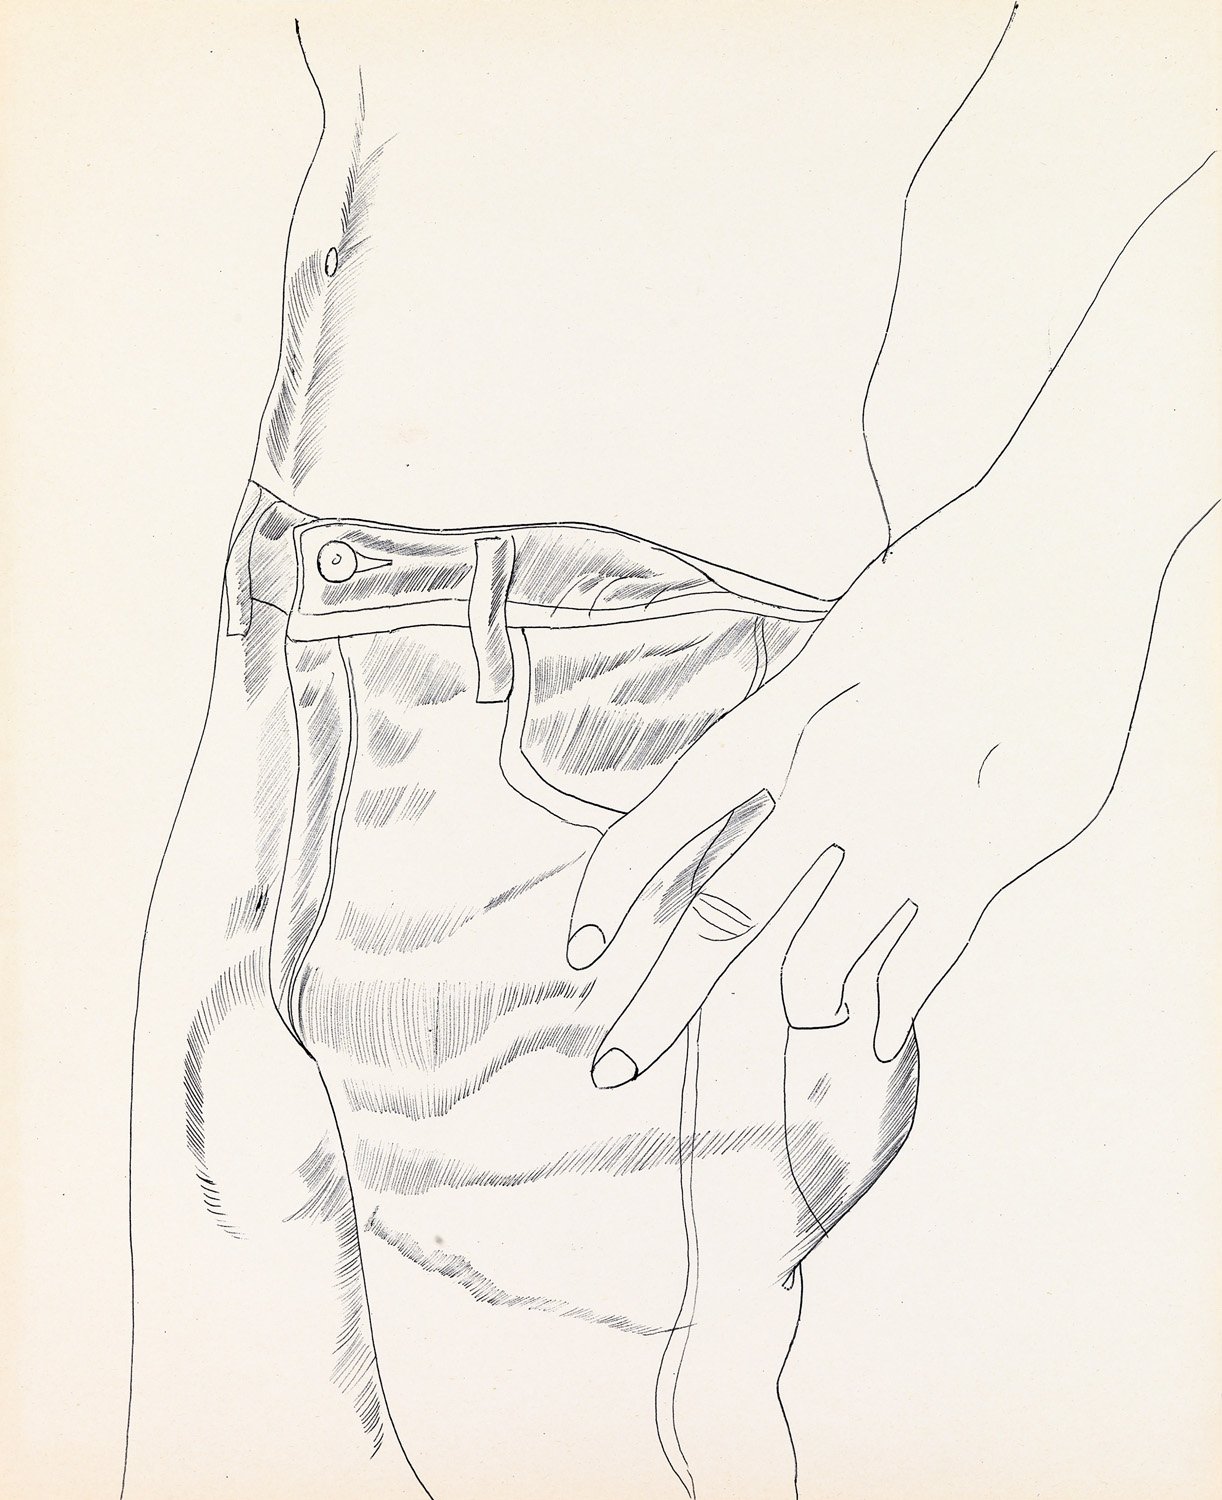 Andy Warhol (1928–1987), Untitled (Hand in Pocket), c. 1956. Ballpoint pen on paper, 42.4 × 34.7 cm. Collection of Mathew Wolf © The Andy Warhol Foundation for the Visual Arts, Inc. / Artists Rights Society (ARS) New York